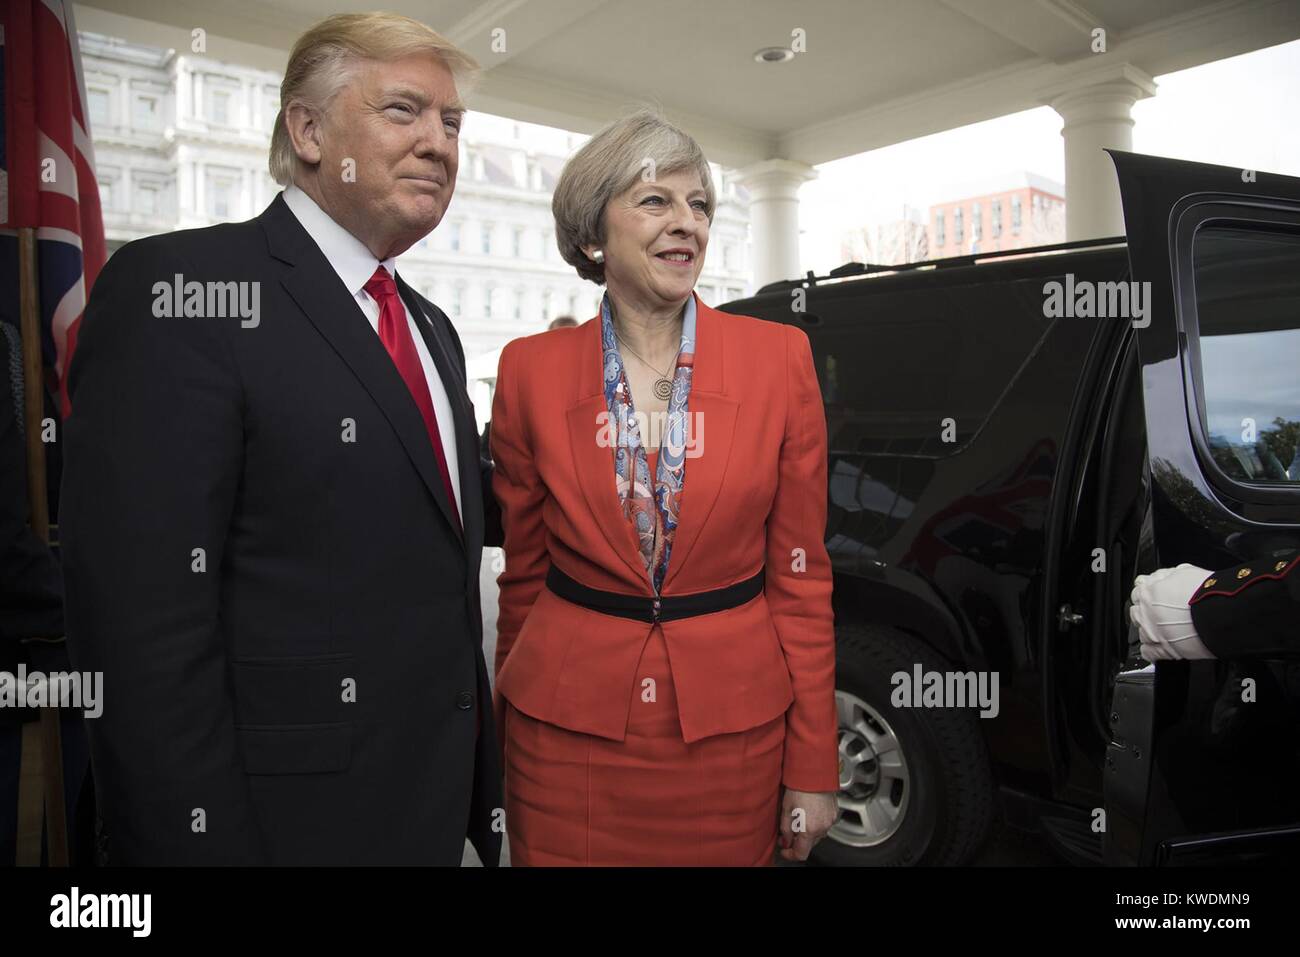 President Donald Trump welcomes British Prime Minister Theresa May to the White House, Jan. 27, 2017. Both were newly installed leaders, and members of the NATO alliance (BSLOC 2017 18 162) Stock Photo